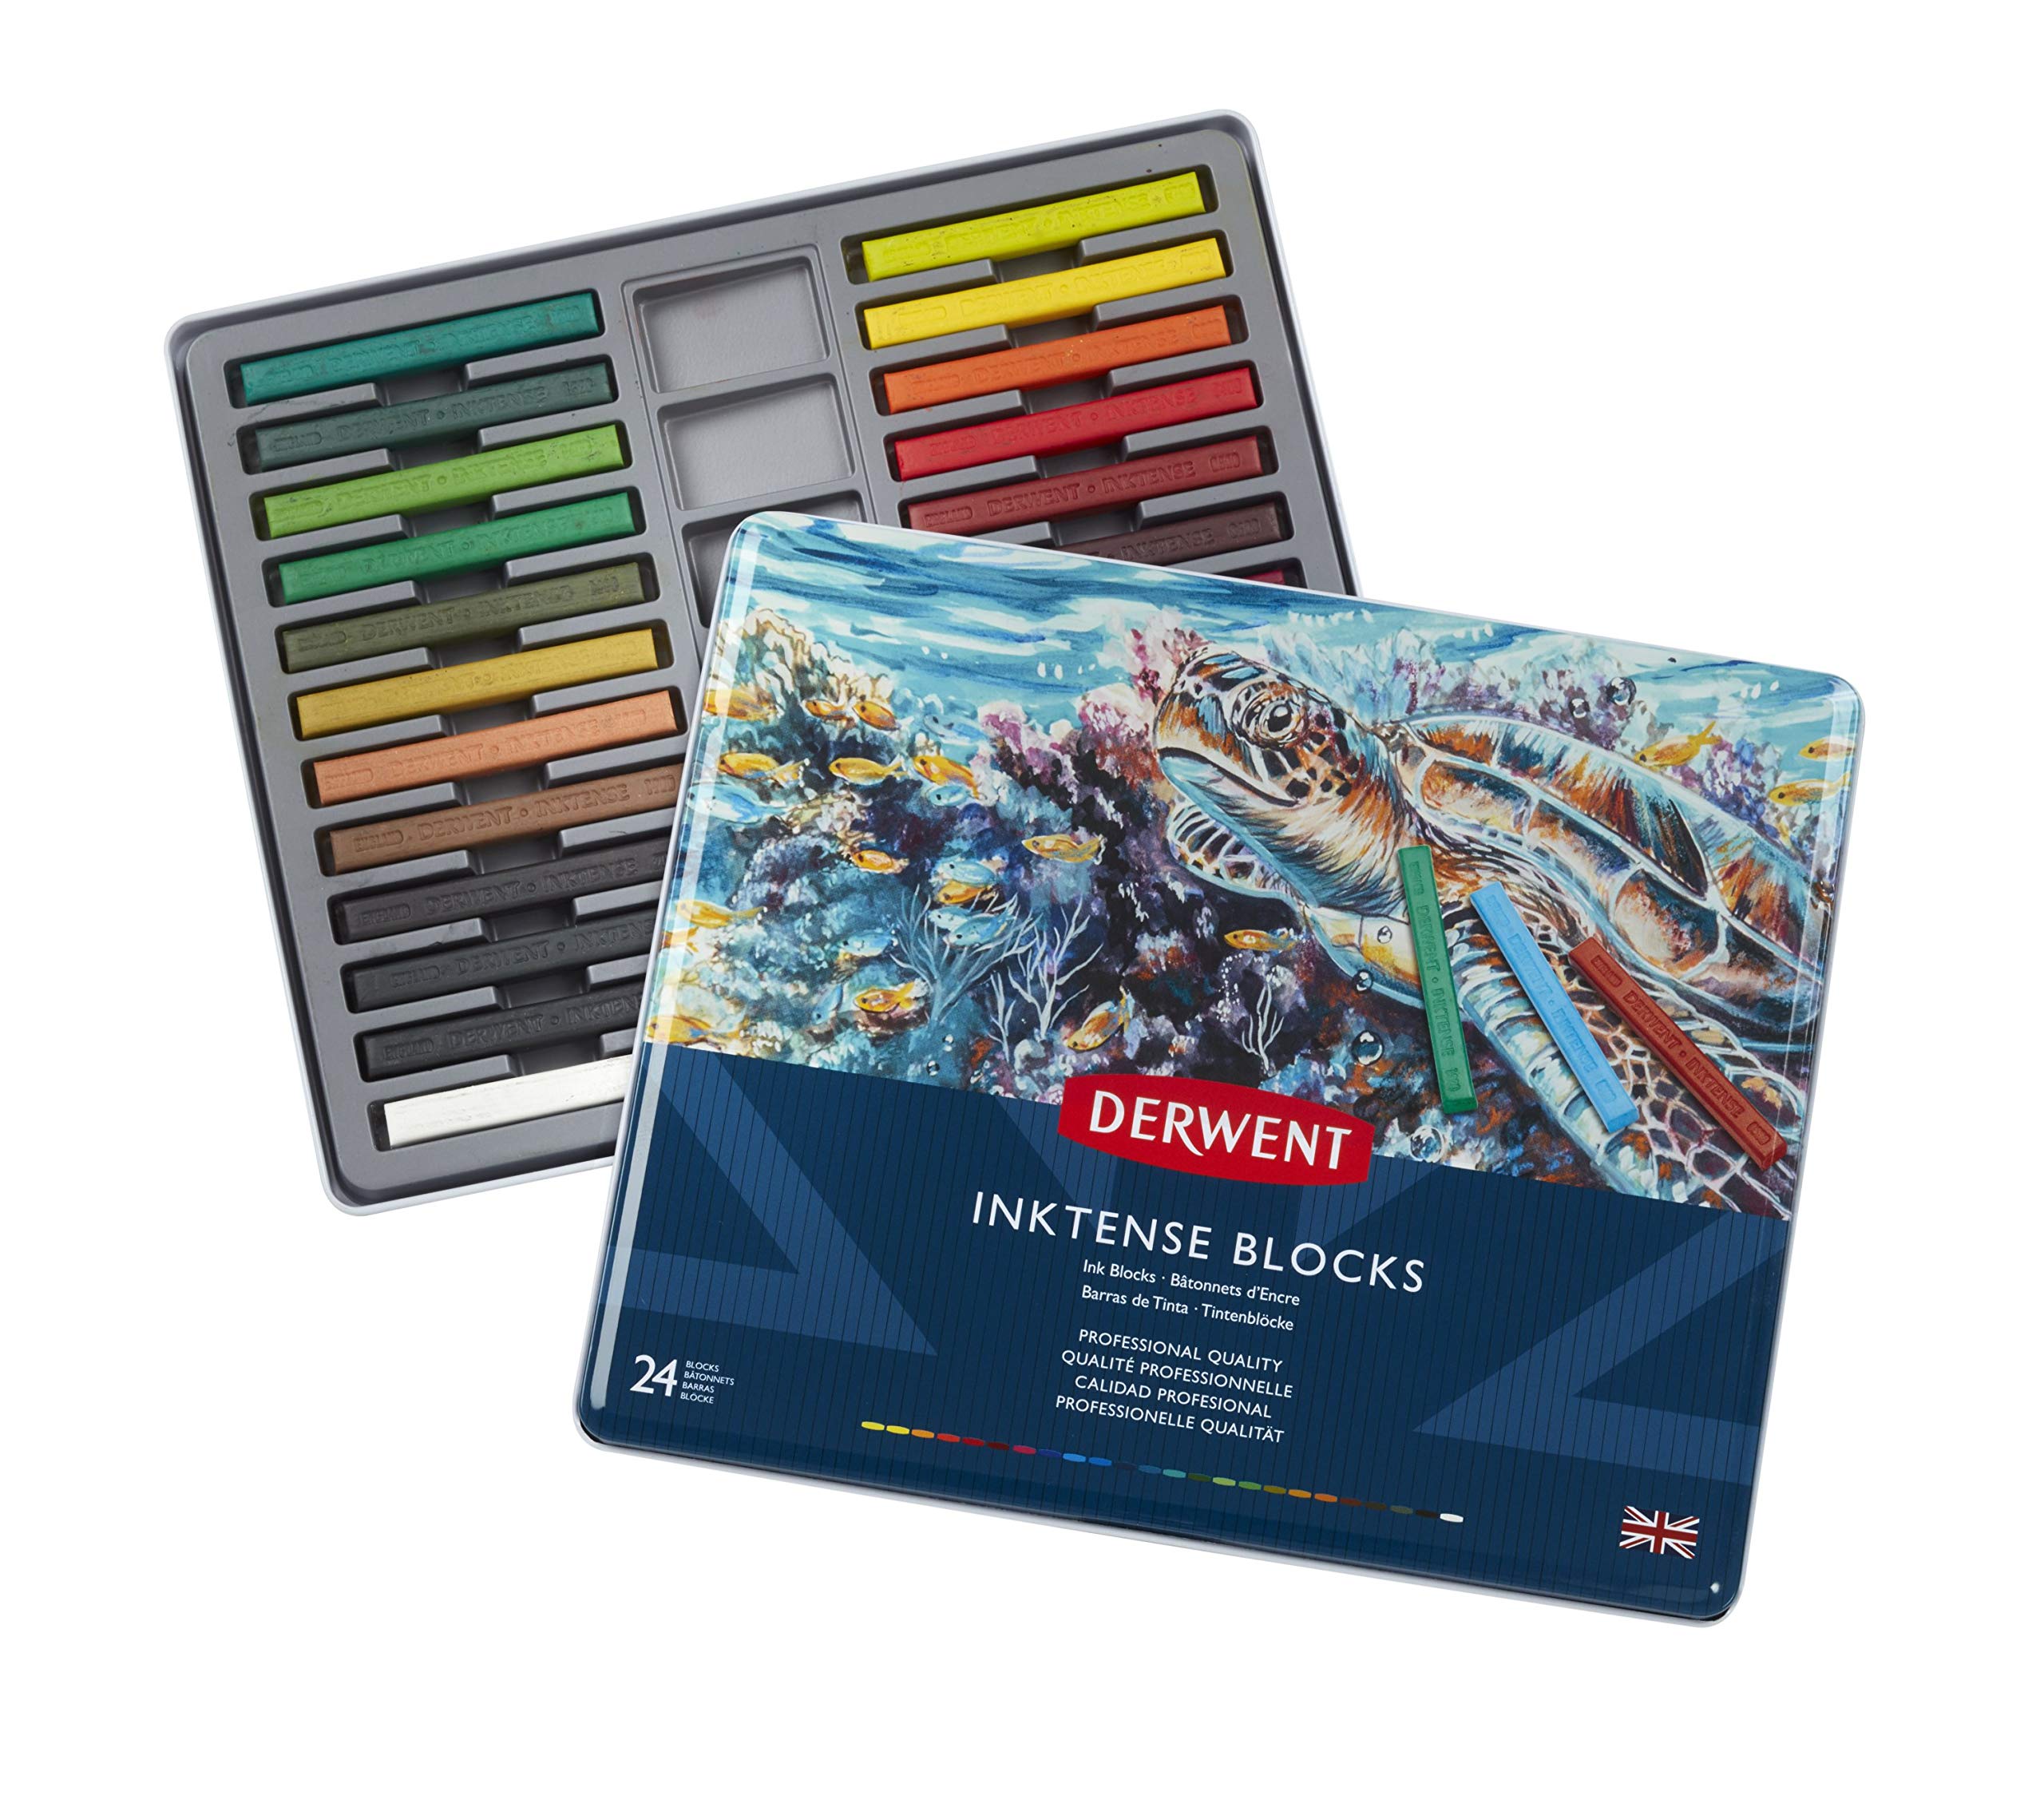 Derwent Inktense Blocks 24 Tin, Set of 24, 8mm Block, Soft Texture,  Watersoluble, Ideal for Watercolor, Drawing, Coloring, Crafts and Painting  on Paper and Fabric, Professional Quality (2300443) 24 Count (Pack of 1)